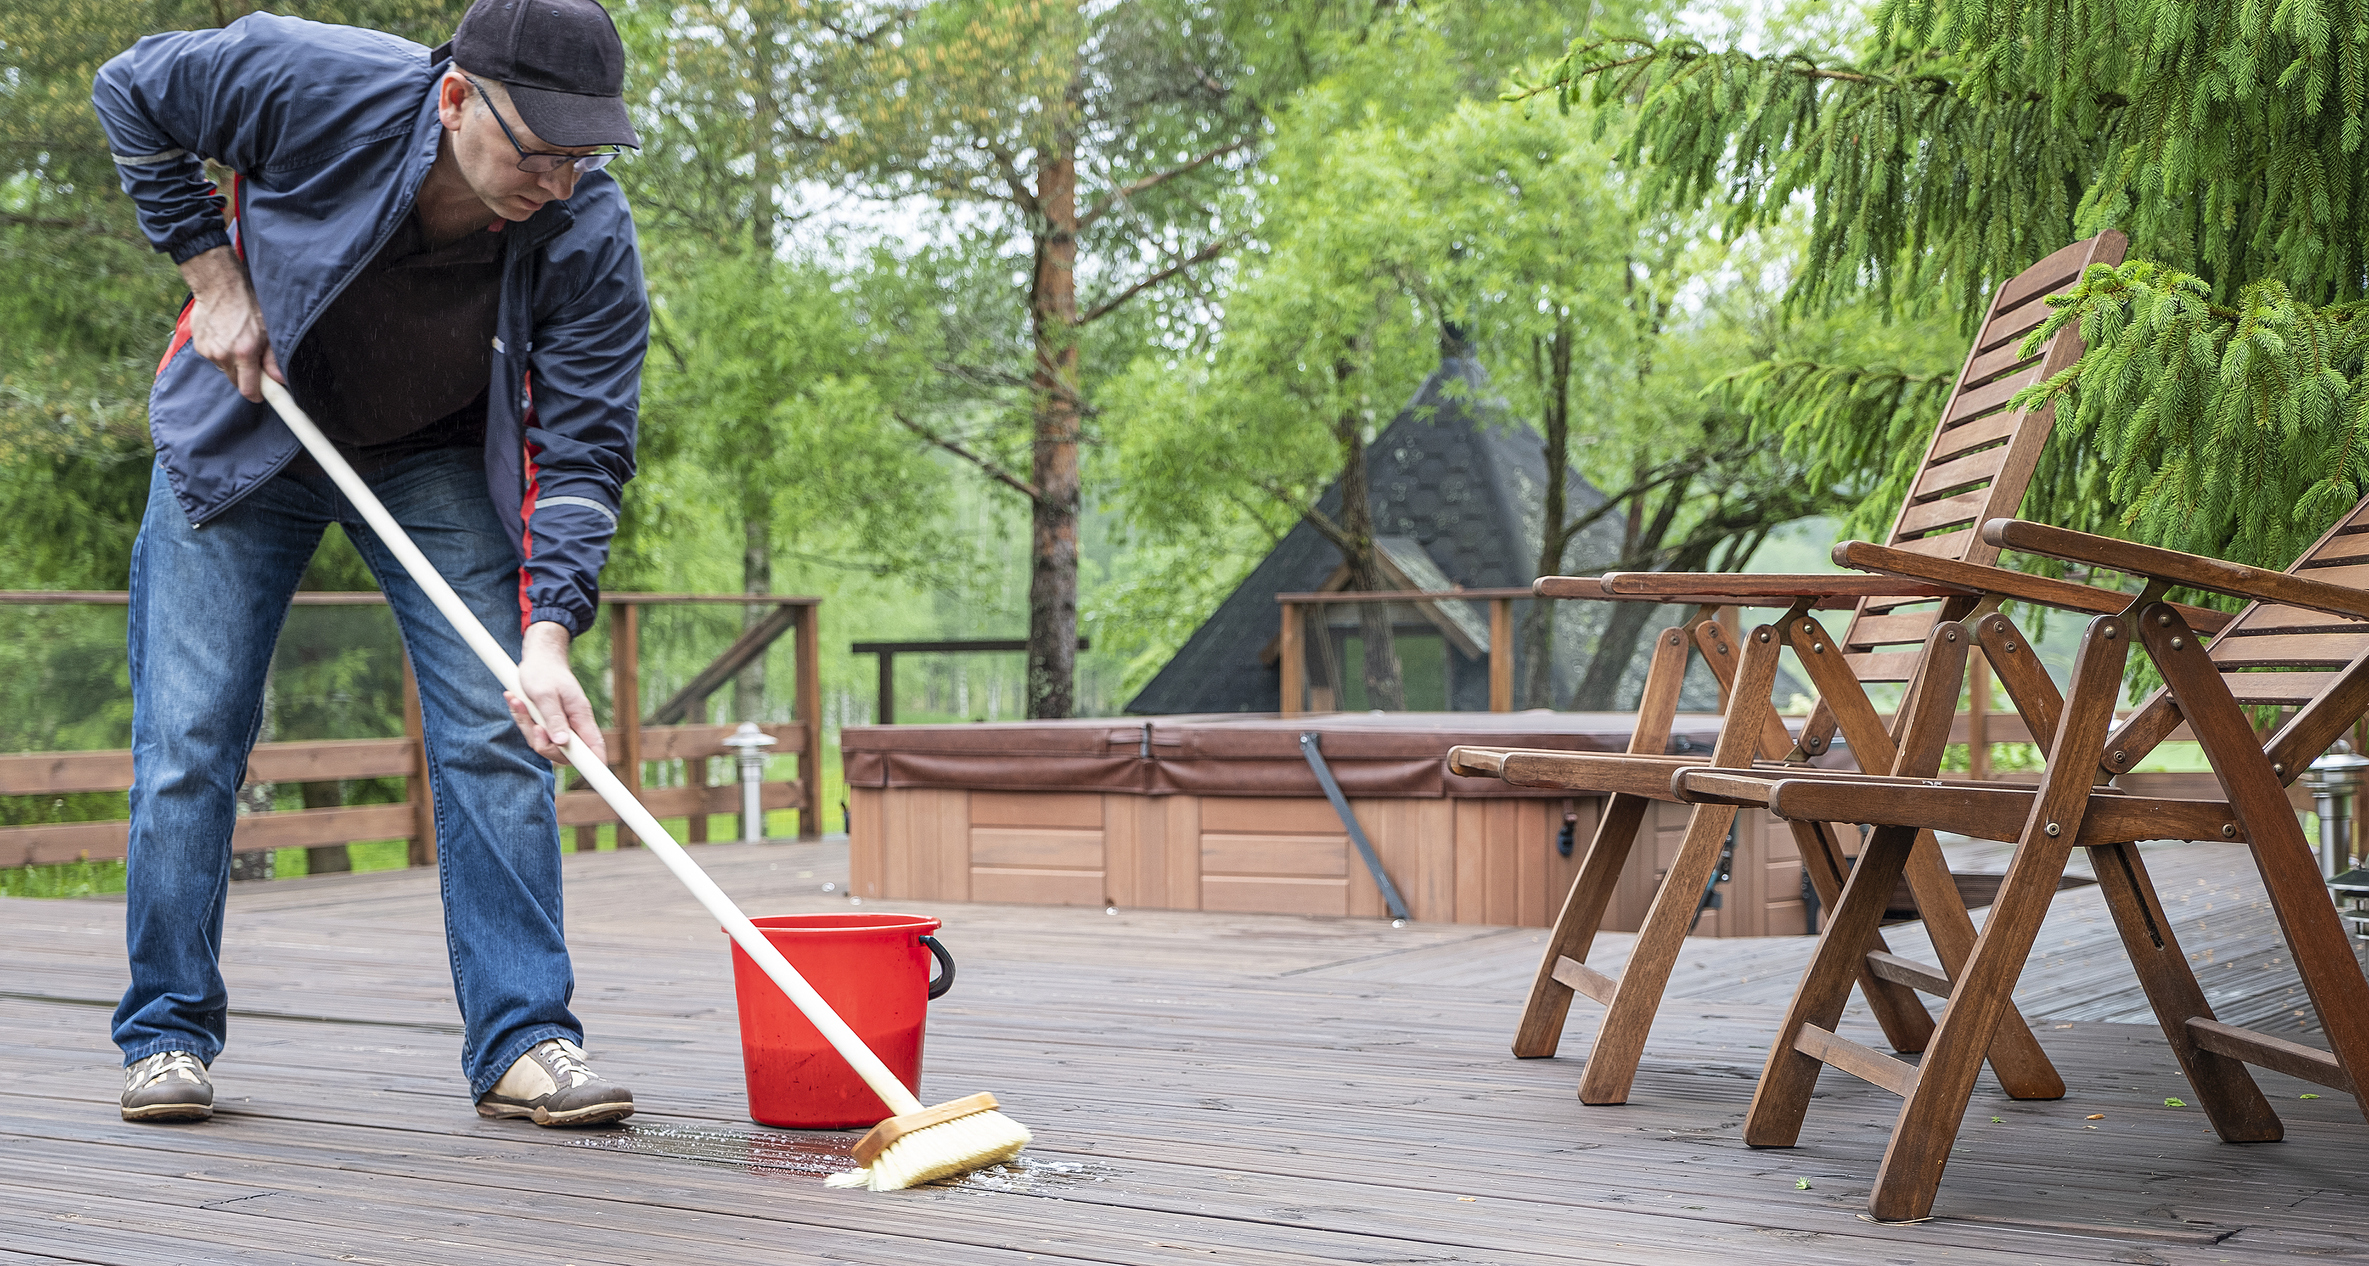 How to Clean Green Stains on a Wood Deck (+Video)